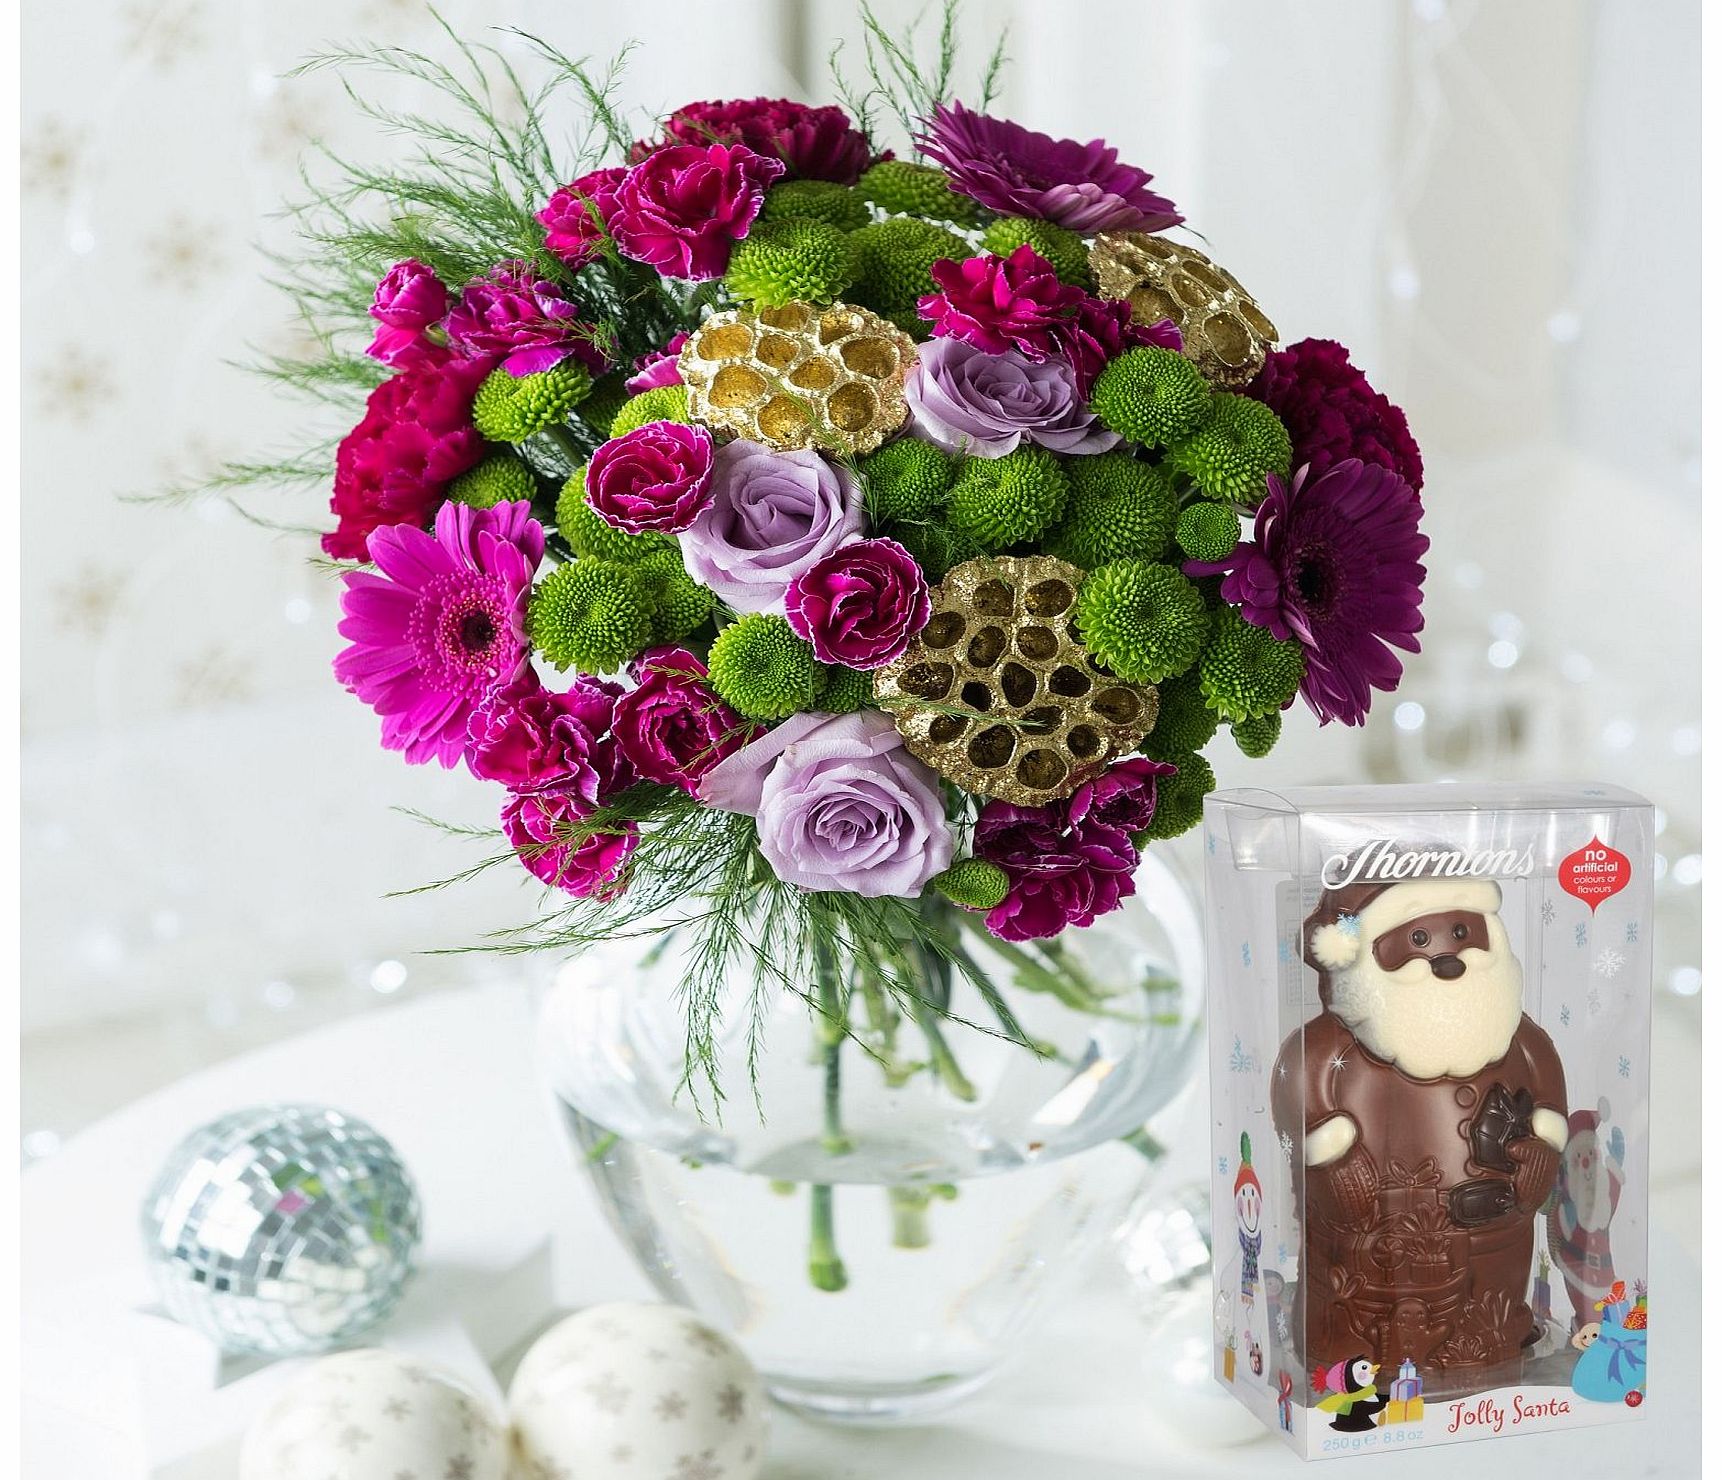 Festive Chic with FREE Thorntons Jolly Santa